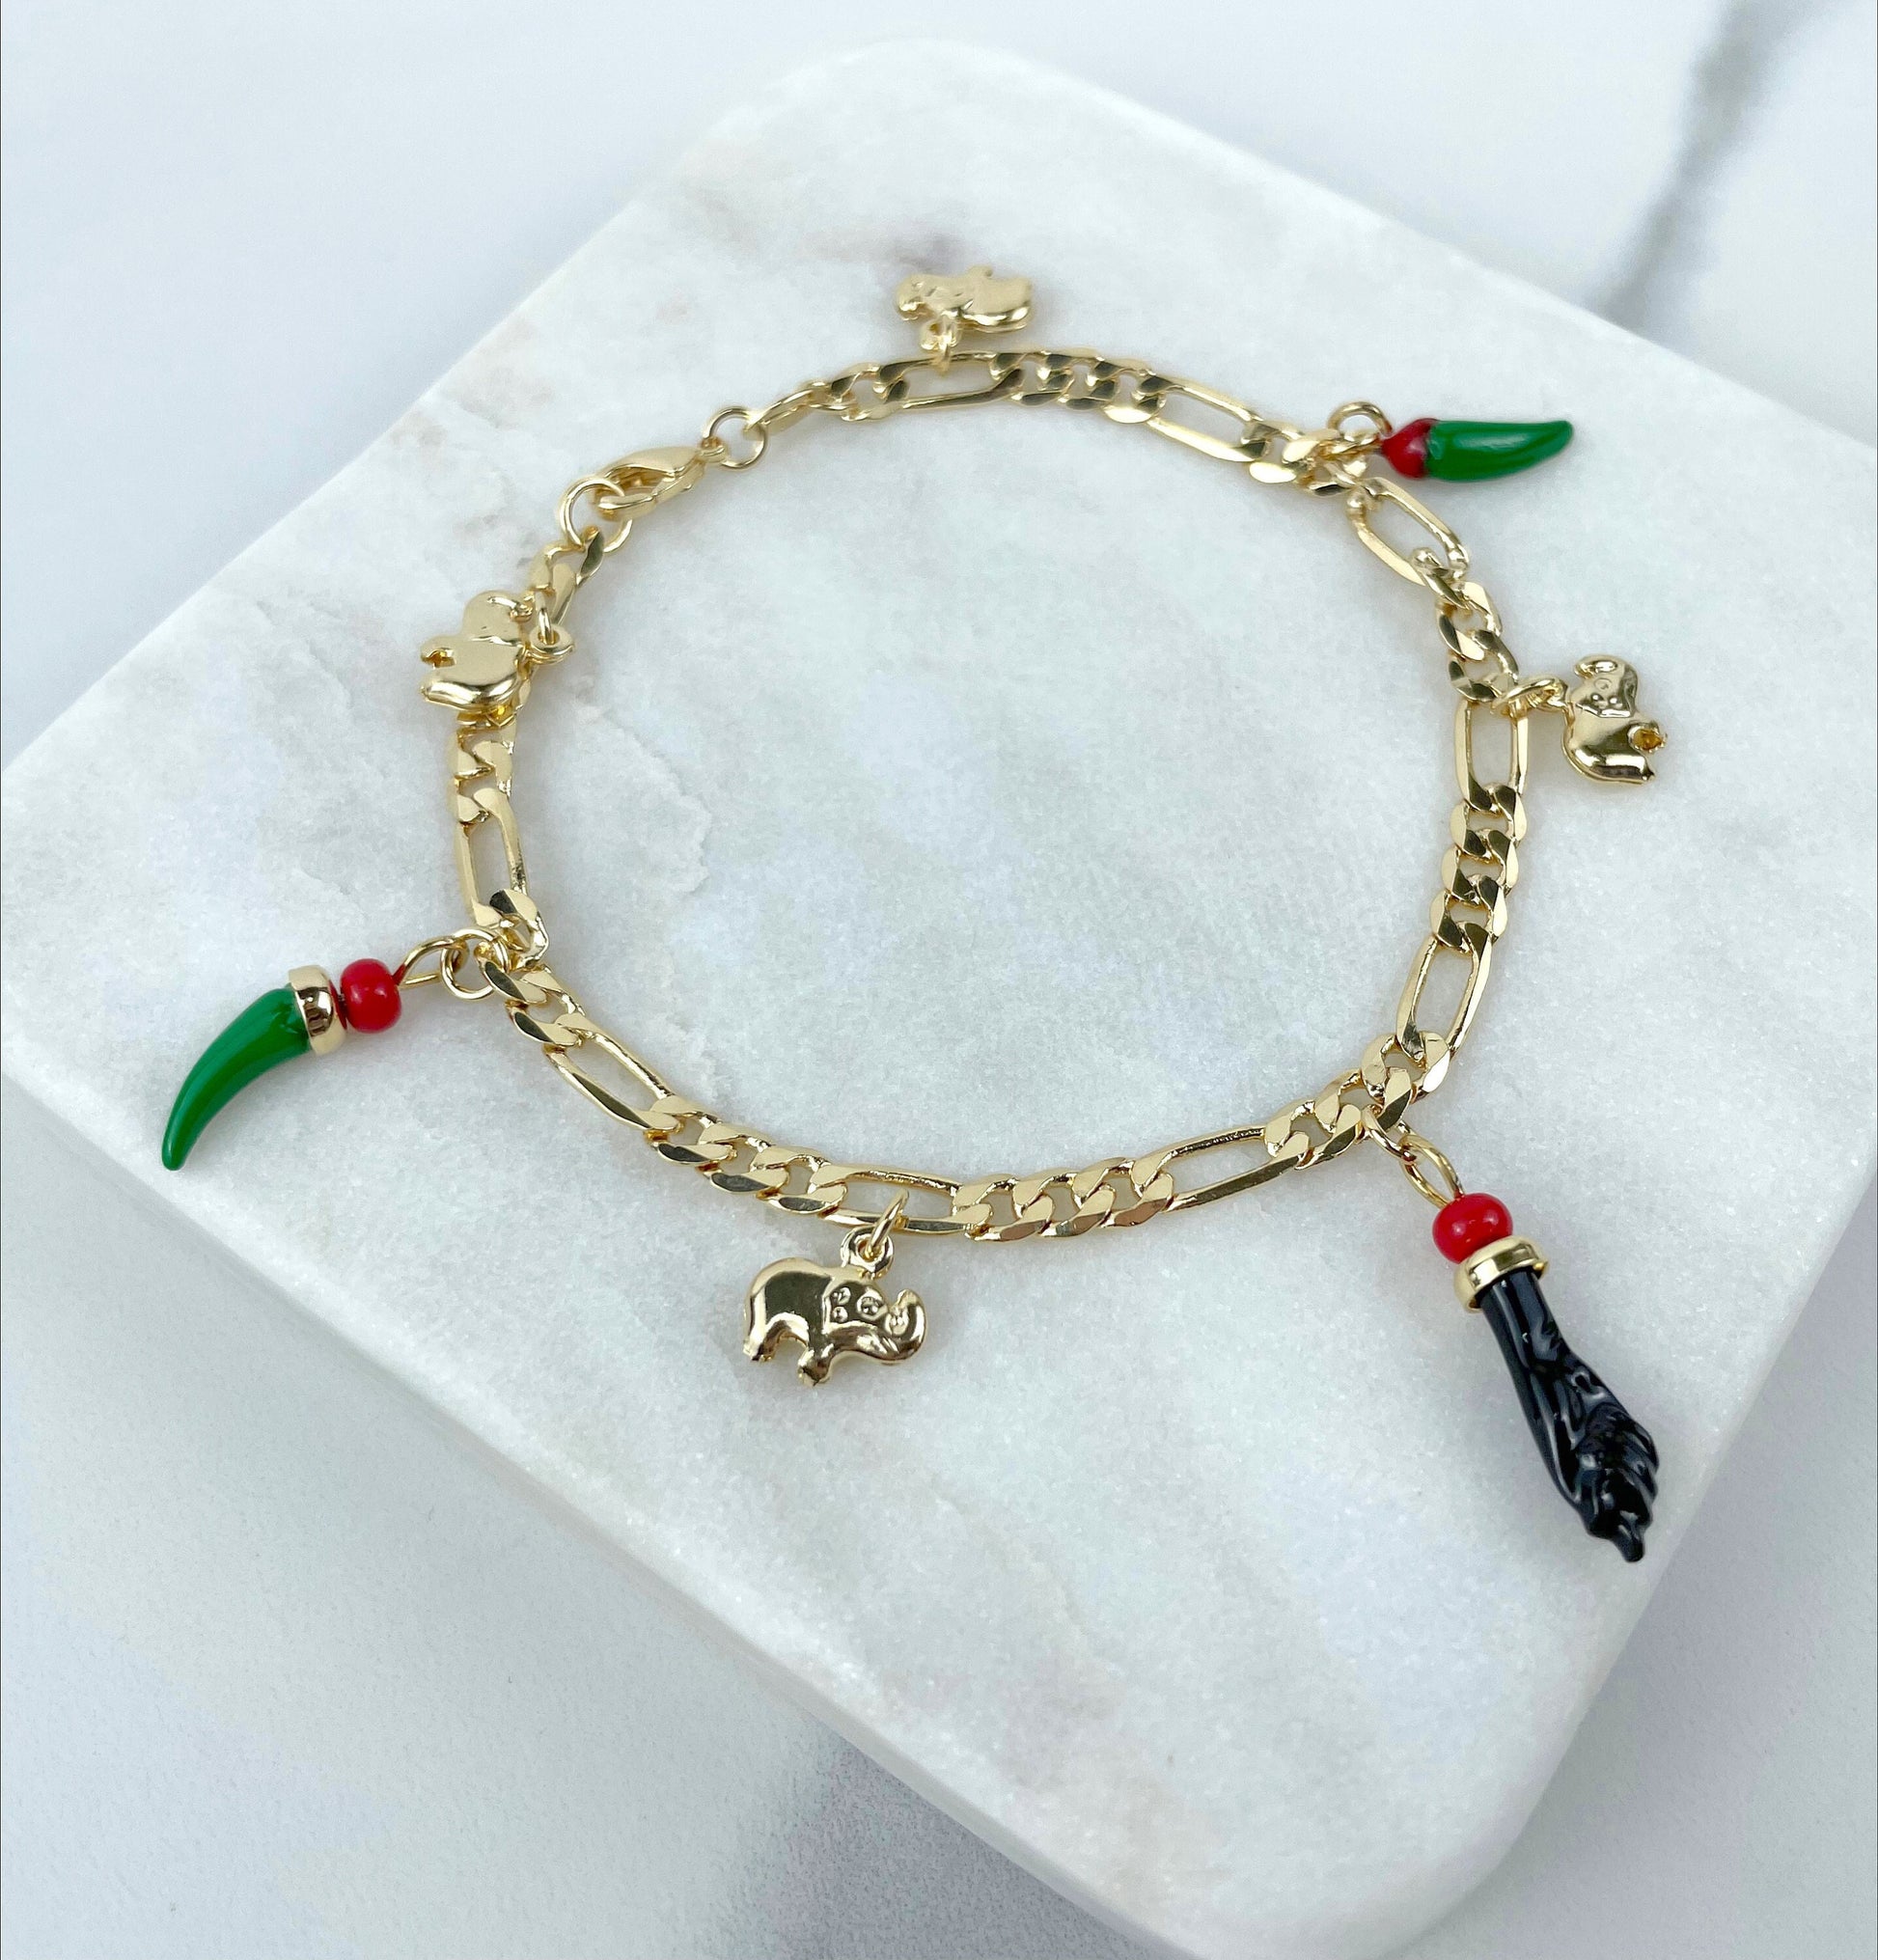 18k Gold Filled 4mm Mariner Link, Elephants, Red Green Chili, Figa Hand Charms Bracelet, Lucky & Protection, Wholesale Jewelry Supplies